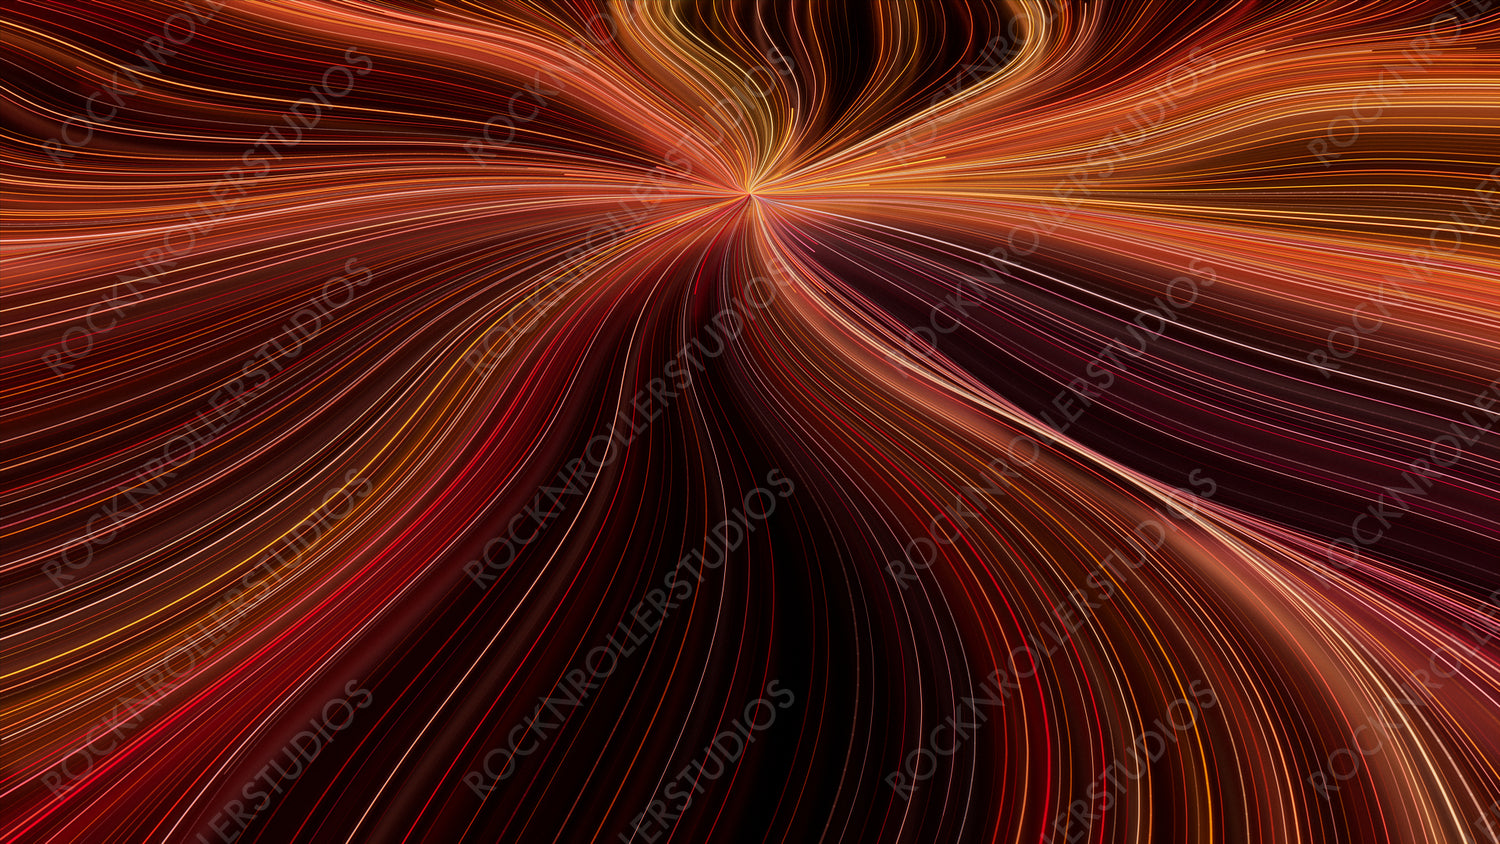 Wavy Lines Background with Orange, Yellow and Red Curves. 3D Render.